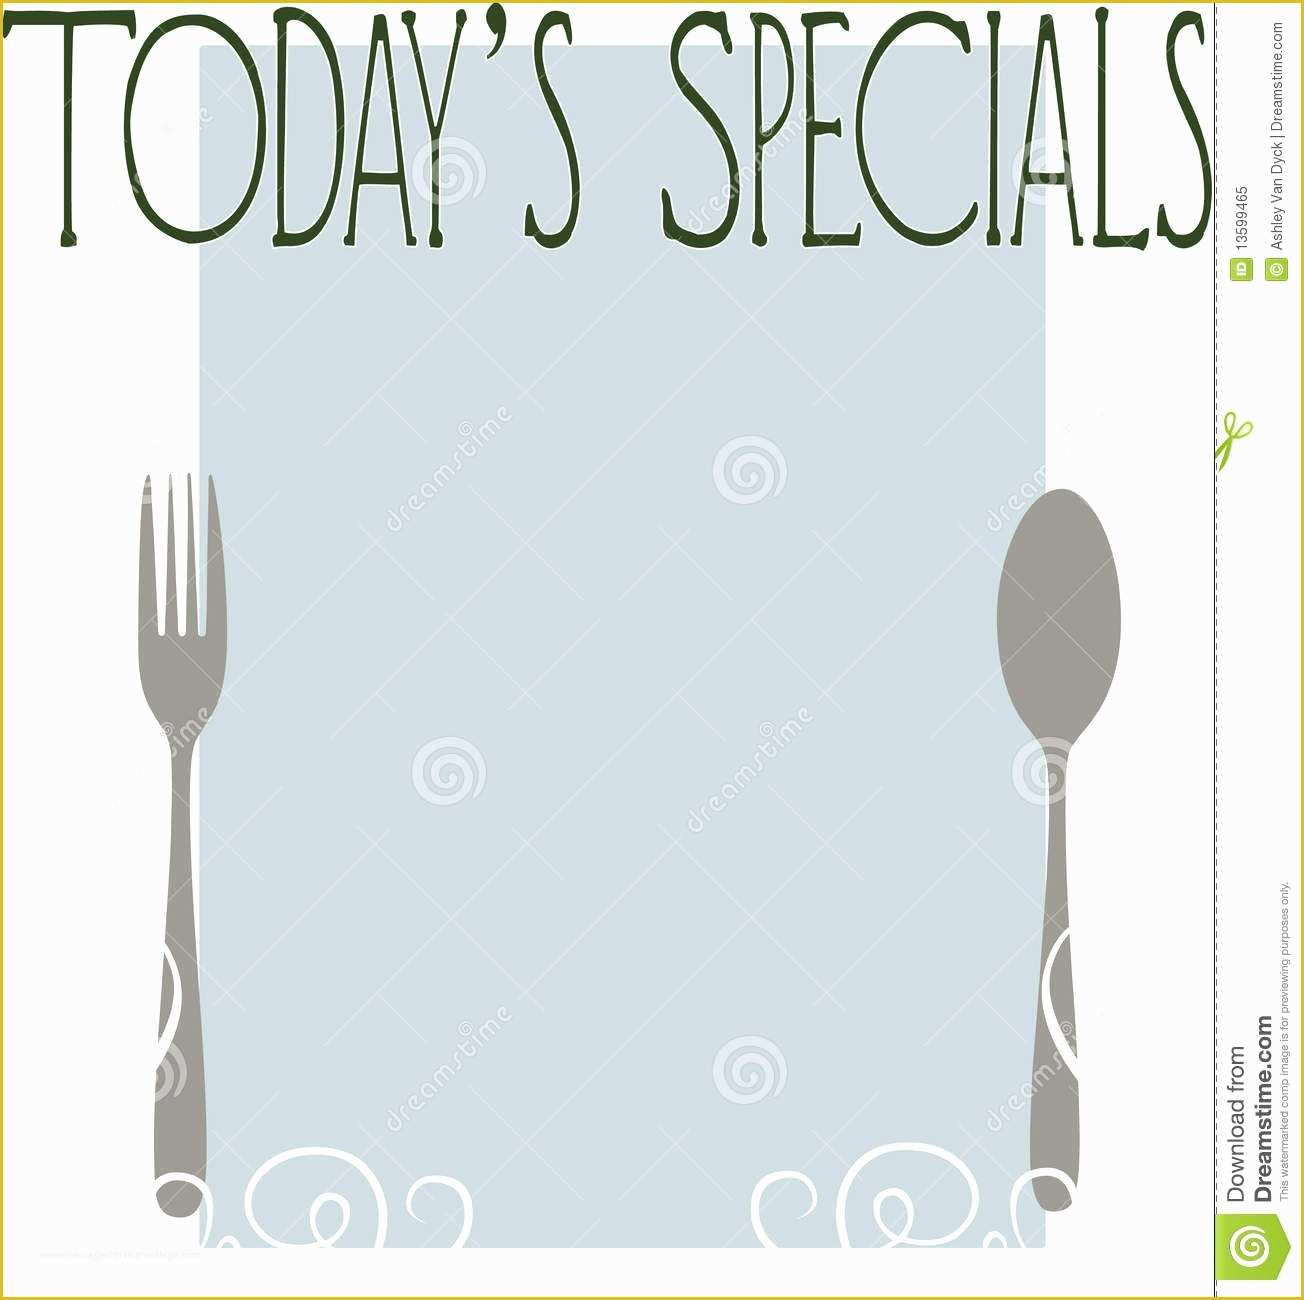 Specials Menu Template Free Of today S Specials Stock Illustration Image Of Diner